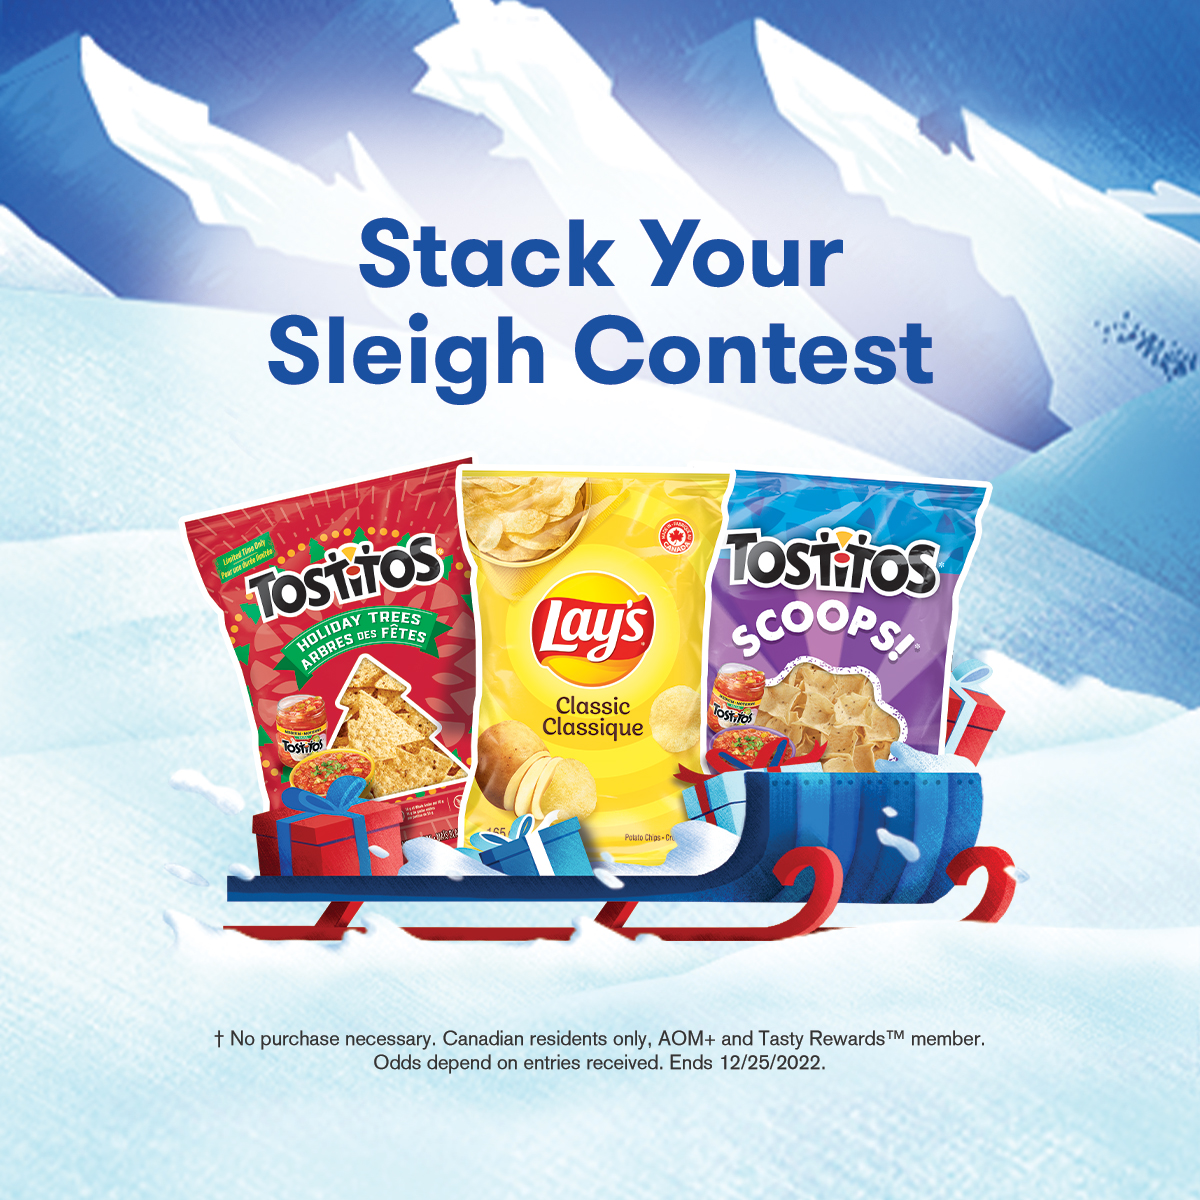 Stack Your Sleigh Contest